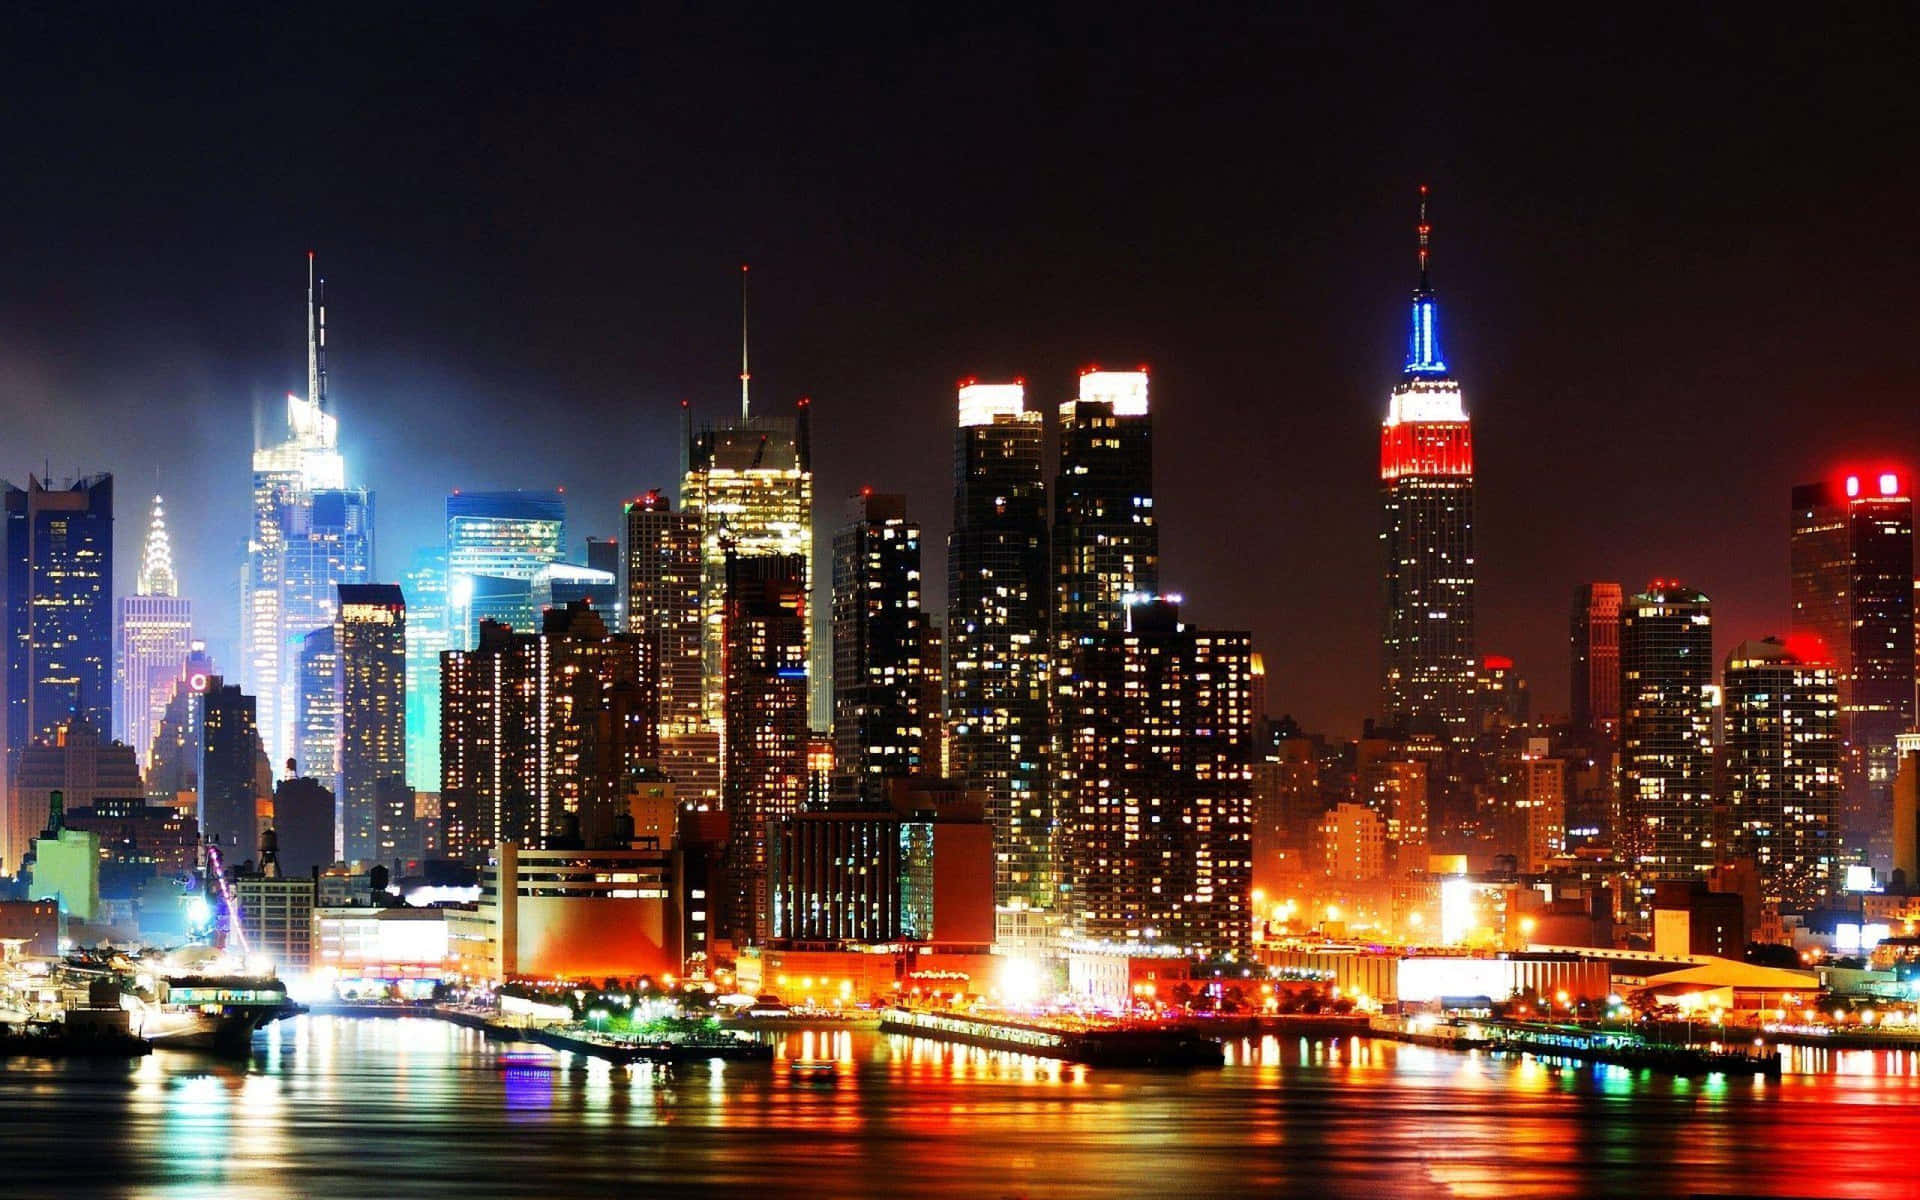 New York City At Night Skyline Picture